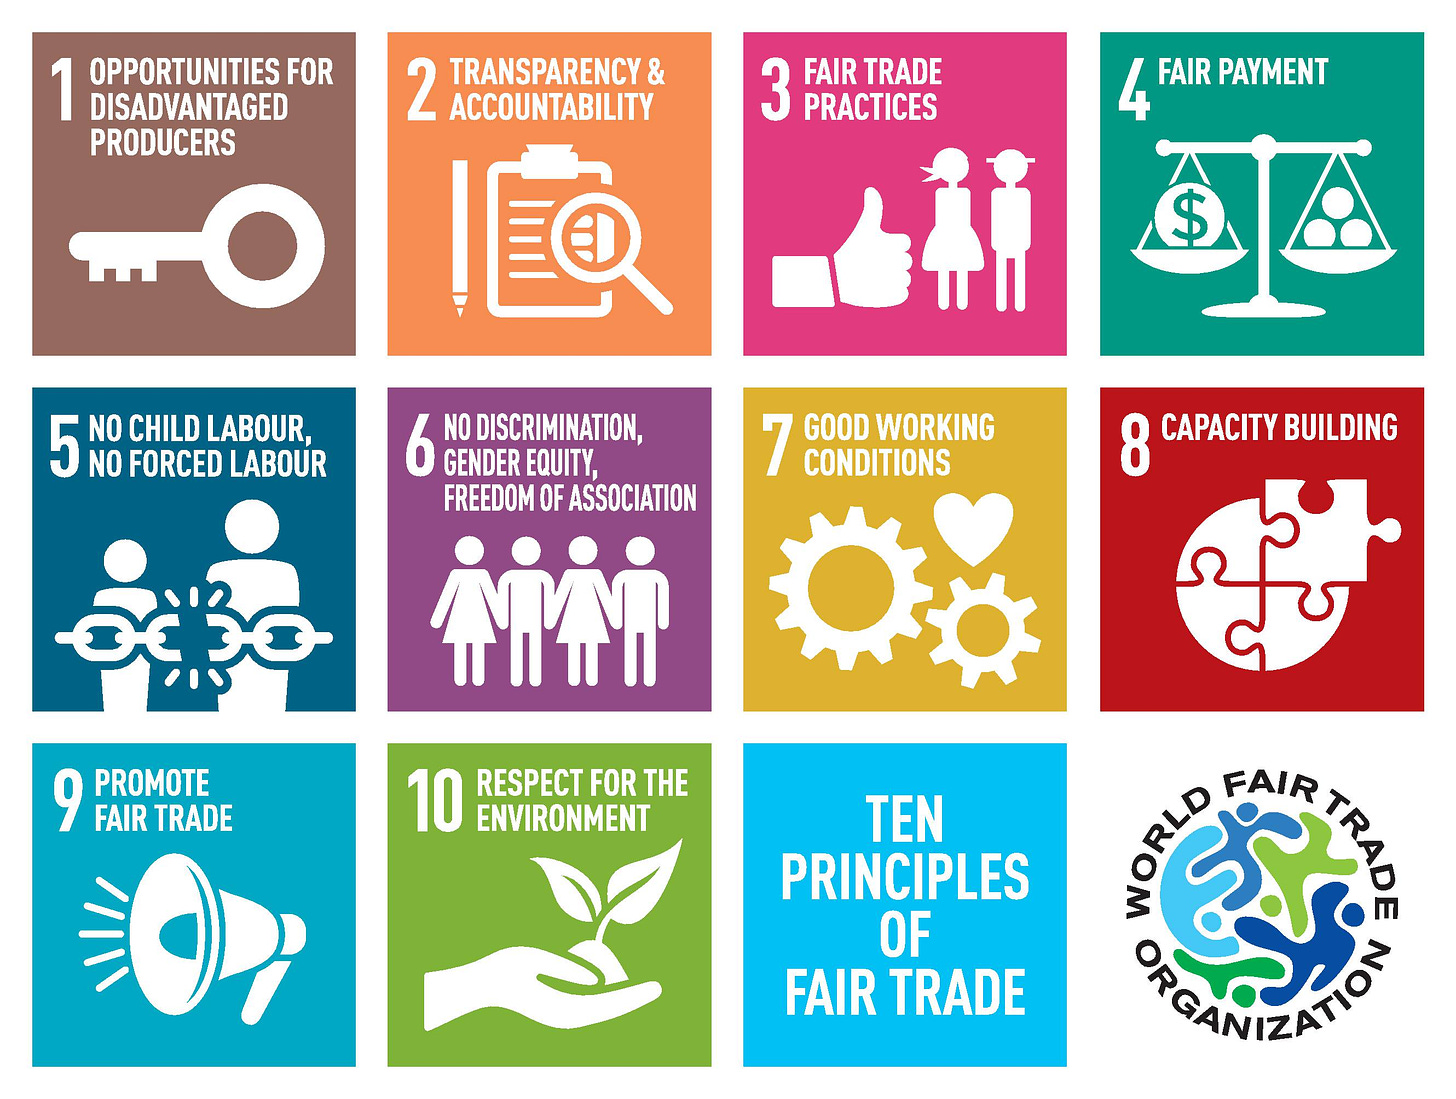 Ten Principles of Fair Trade graphic. Opportunities for disadvantaged producers; transparency and accountability; fair trade practices; fair wages; no child labour or forced labour; no discrimination, gender equity, freedom of association; capacity building, promote fair trade, respect for the environment